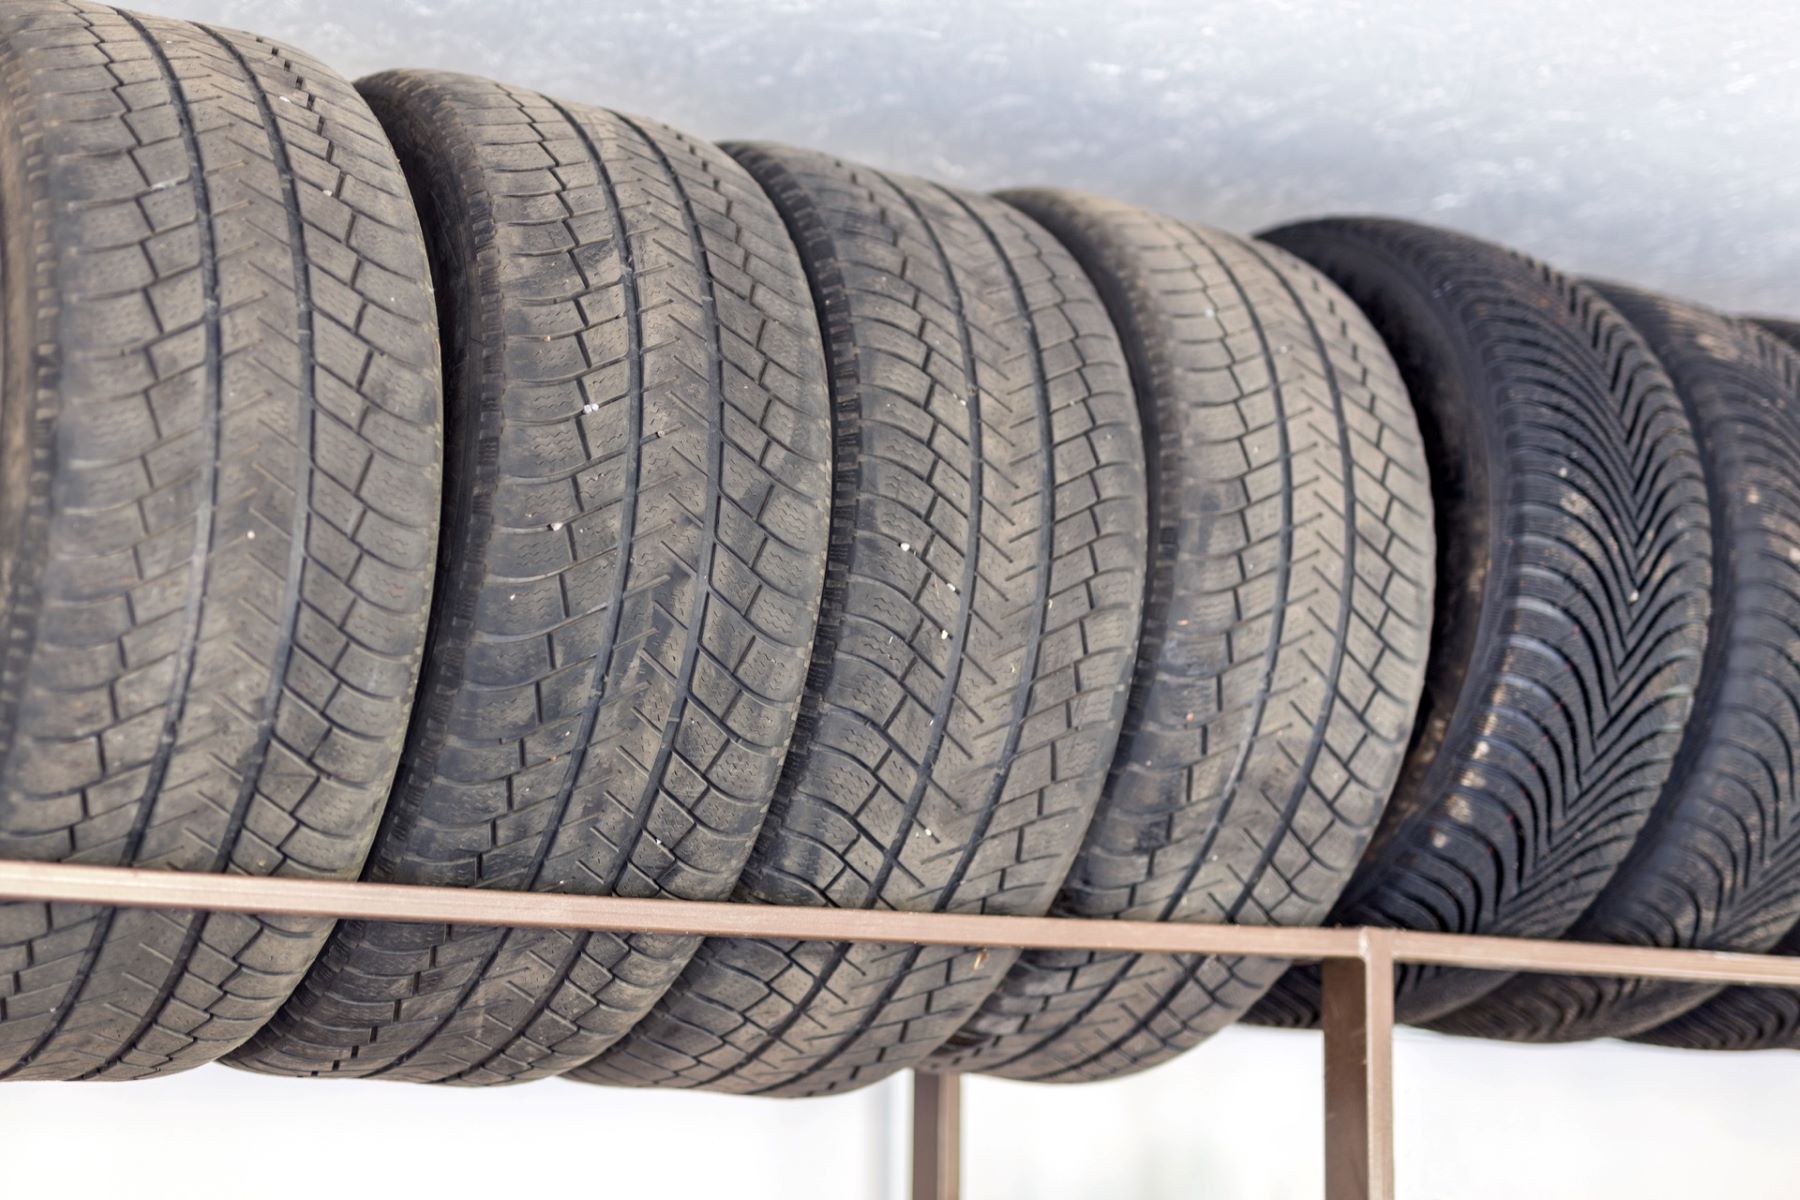 How To Store Unmounted Tires